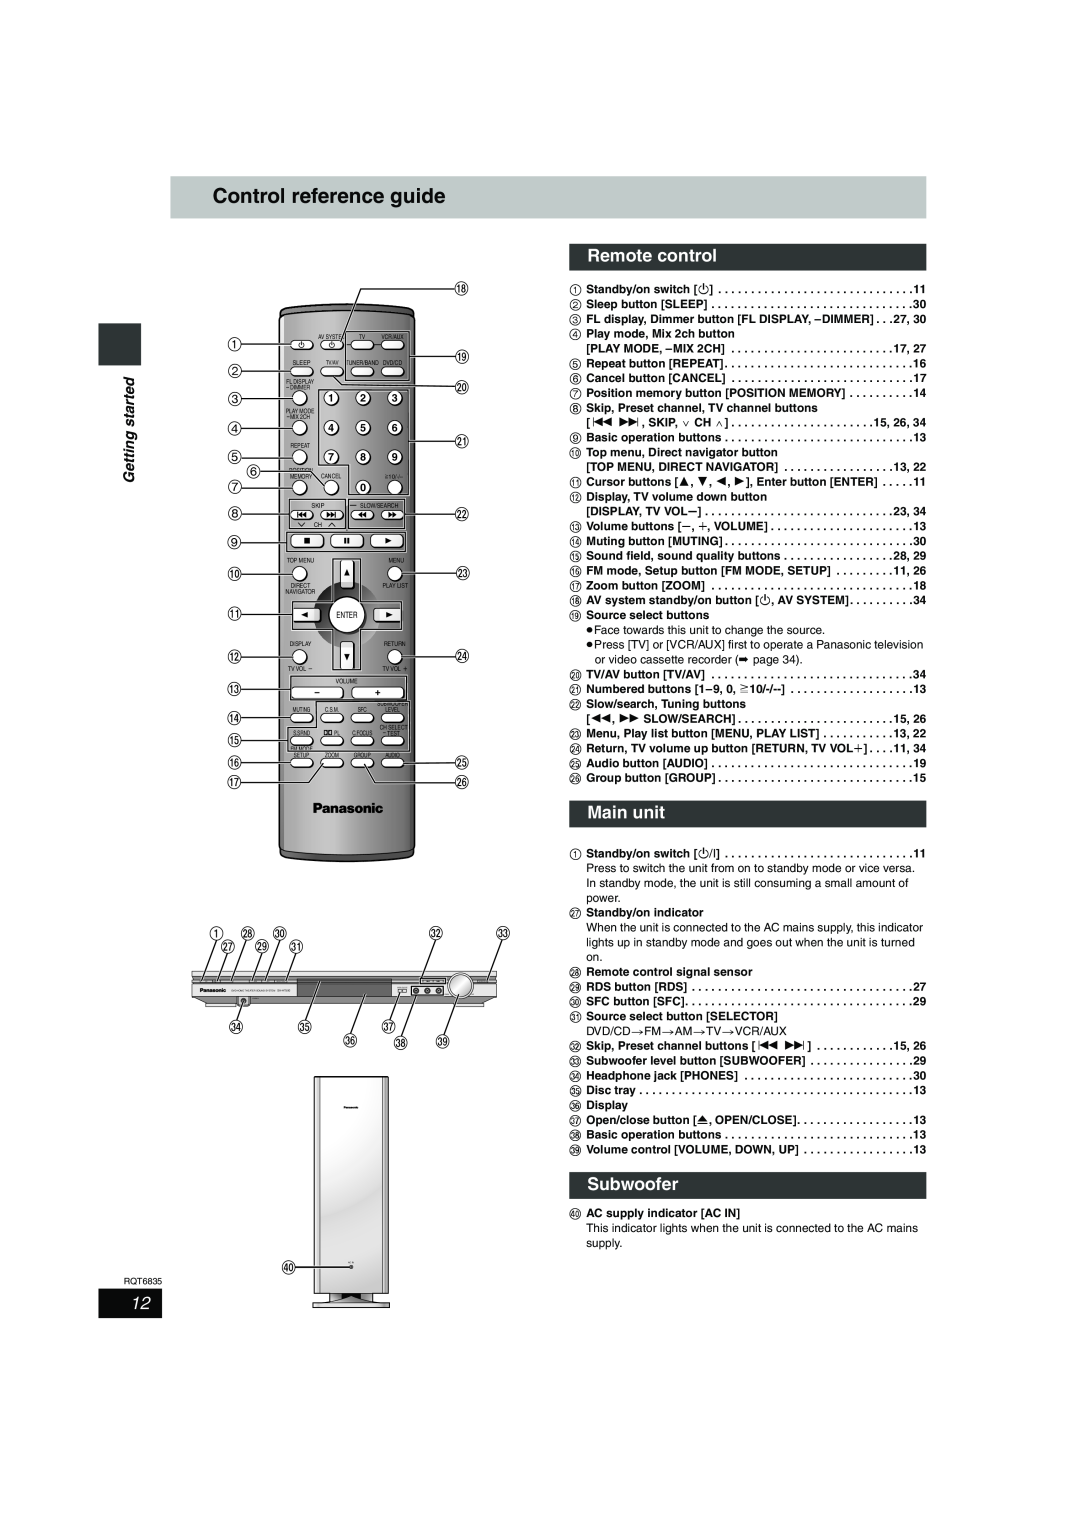 Panasonic SC-HT500 operating instructions Control reference guide, Remote control, Main unit, Subwoofer, Getting started 